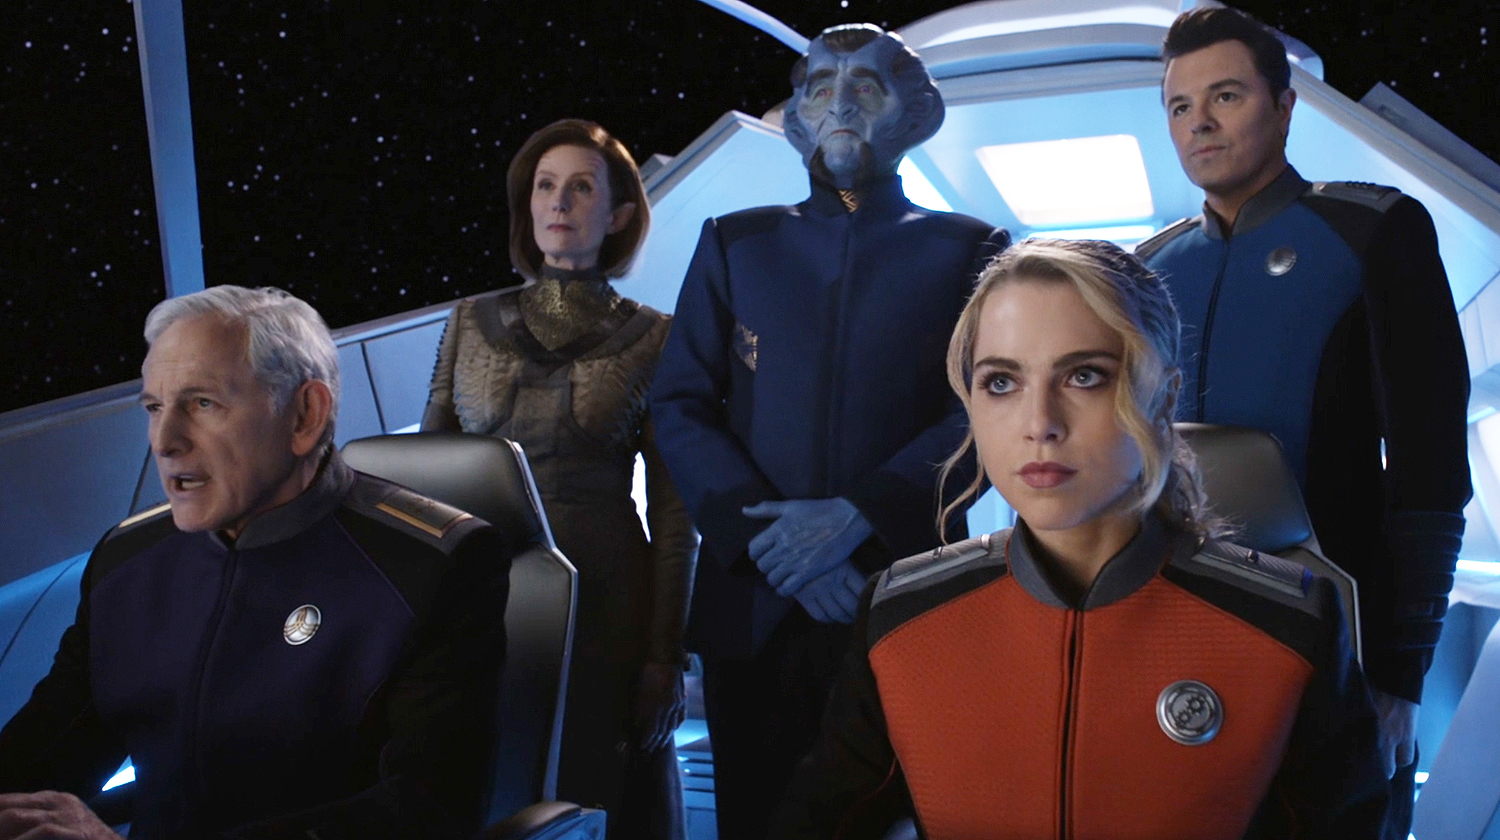 The Orville crew and dignitaries in a shuttlecraft.